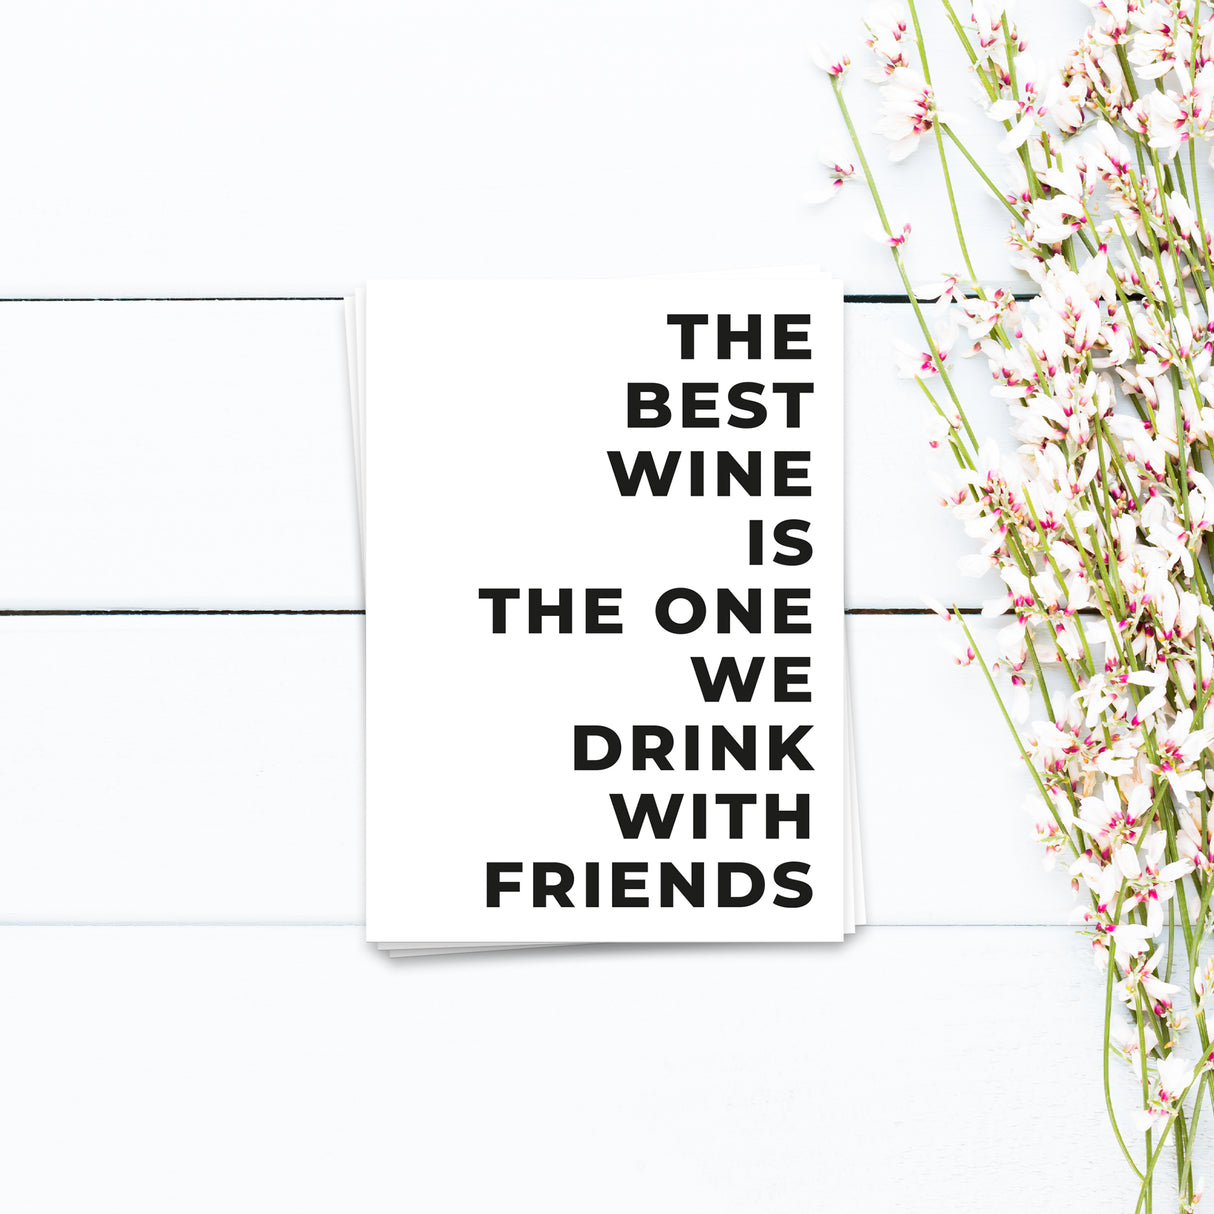 The best wine is the one we drink with friends - Postkarte